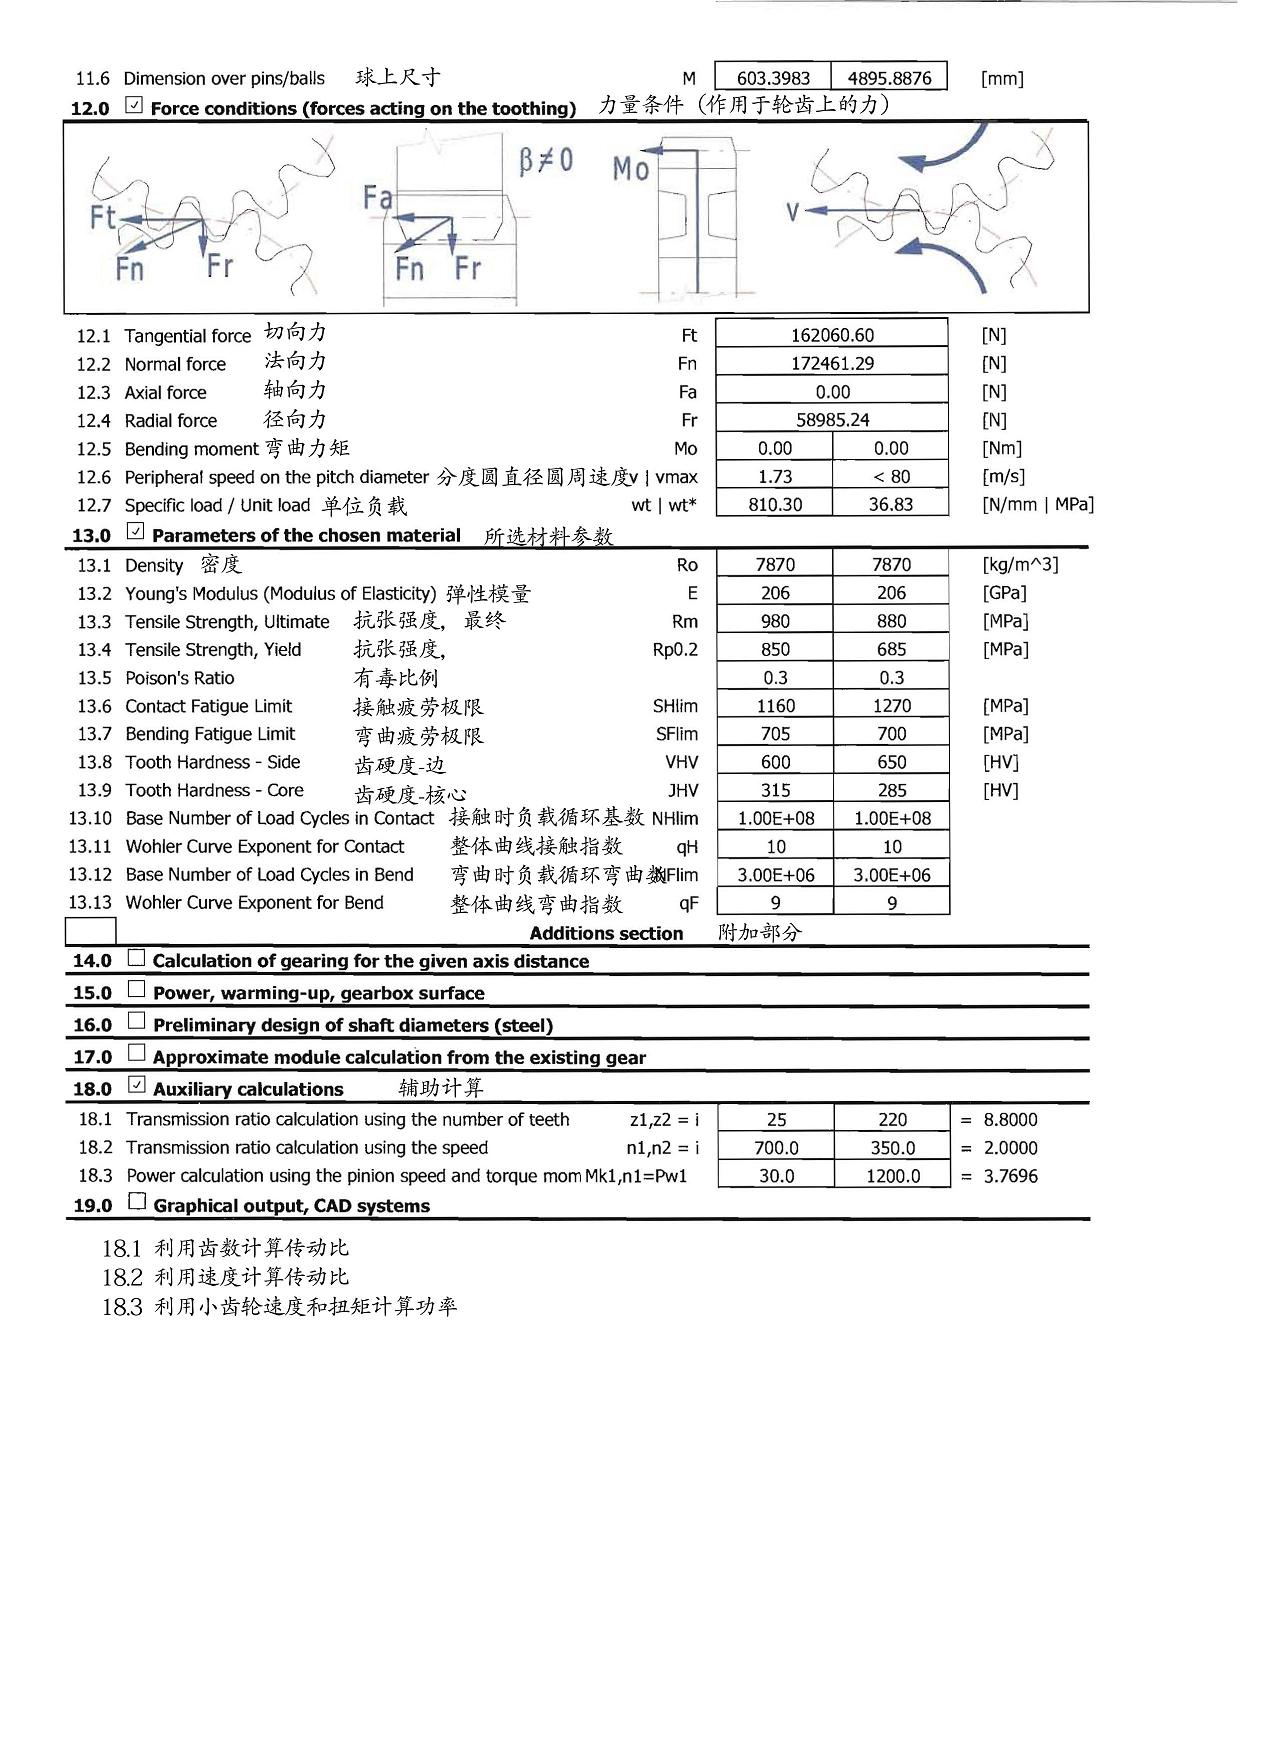 Specifications for Geared crown and Pinion - 1-7.jpg